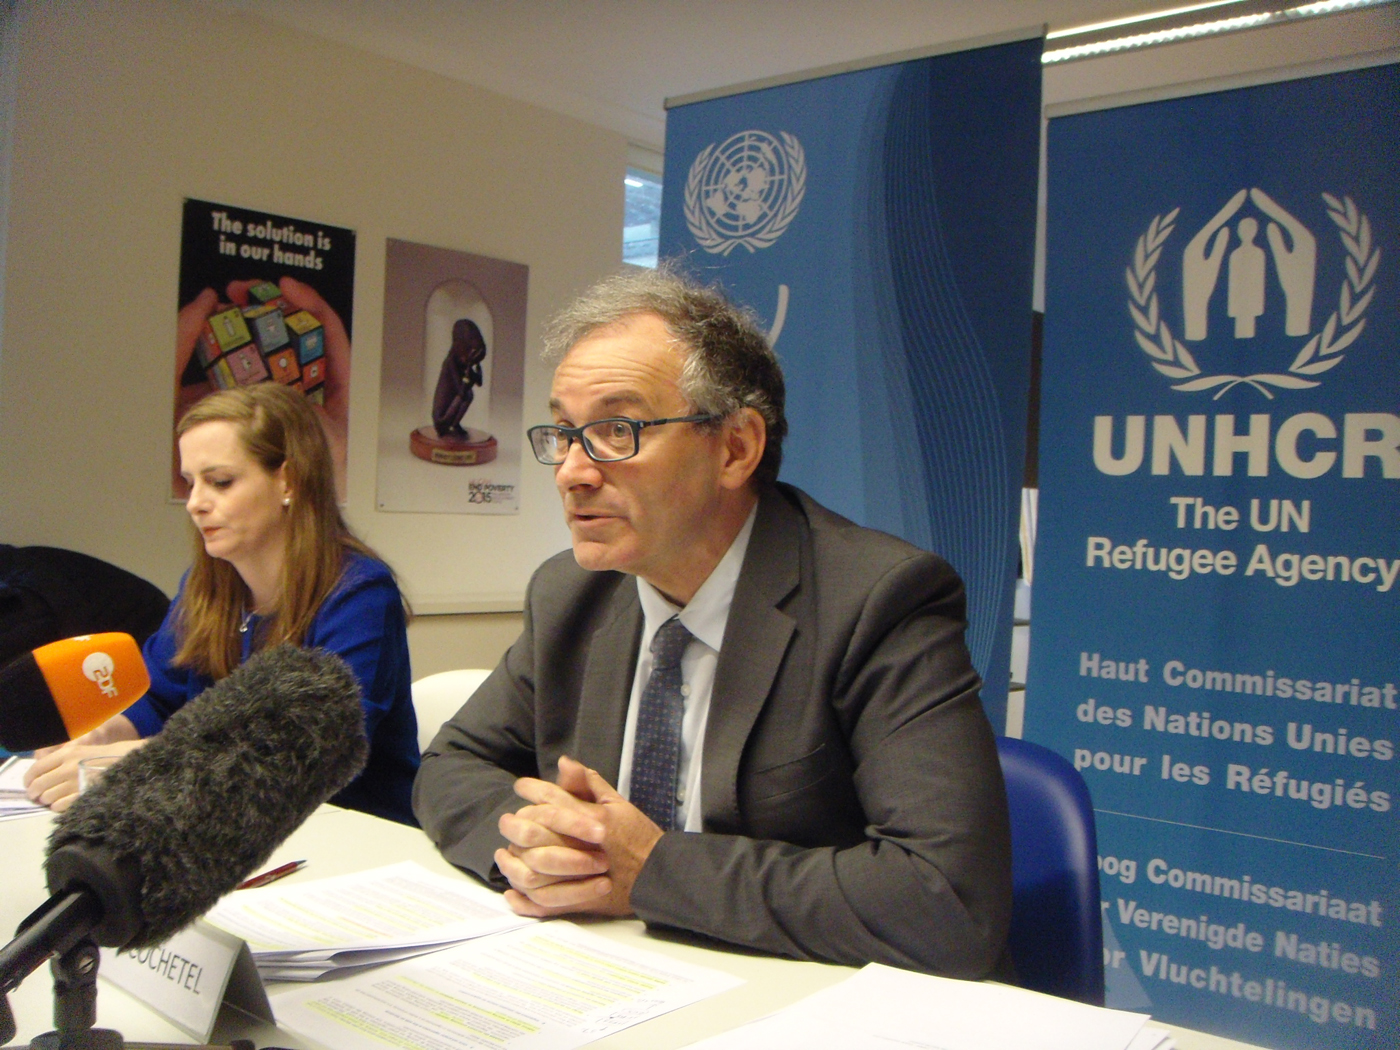 Vincent Cochetel, Director of the UN refugee agency, UNHCR, Bureau for Europe and UNHCR's Regional Refugee Coordinator for the refugee crisis in Europe